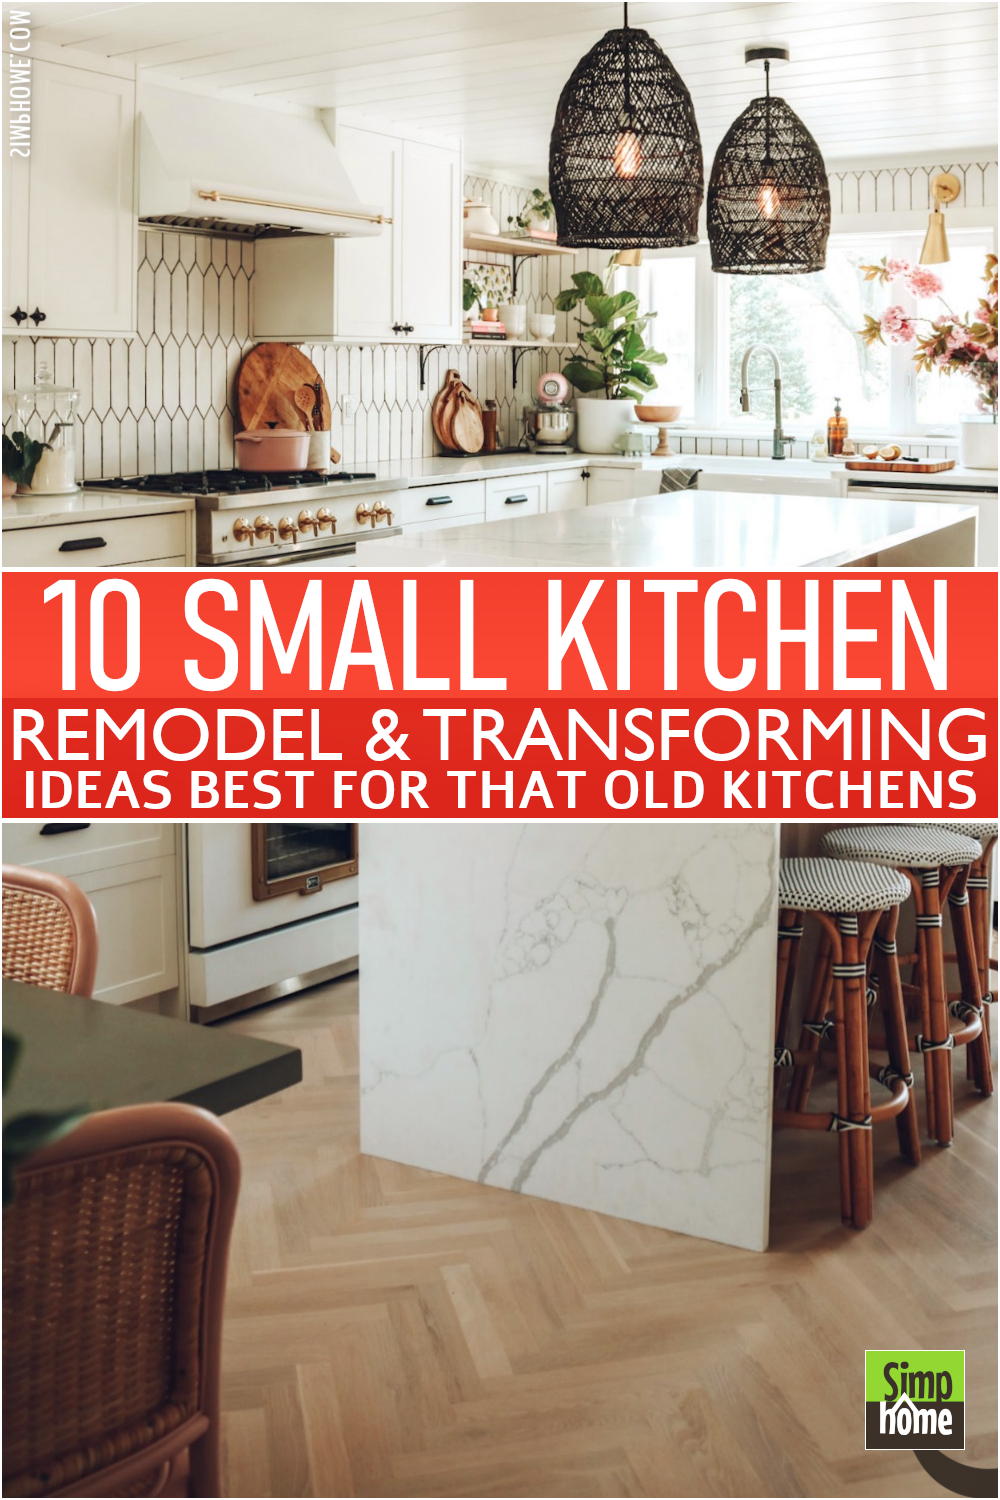 10 Small Kitchen Remodels poster from SImphome